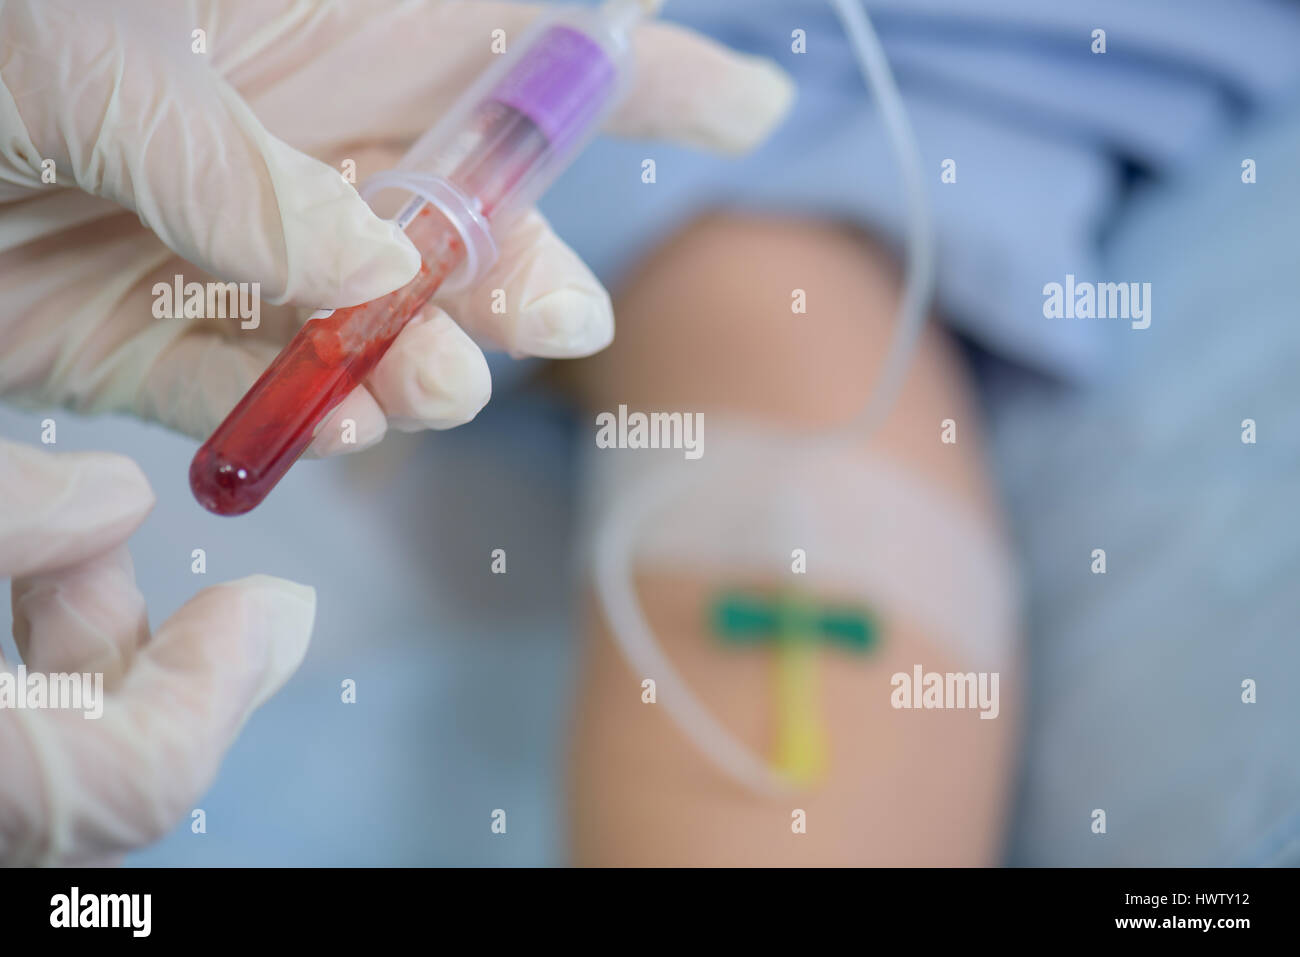 Closeup of test tube of blood from patient's arm Stock Photo